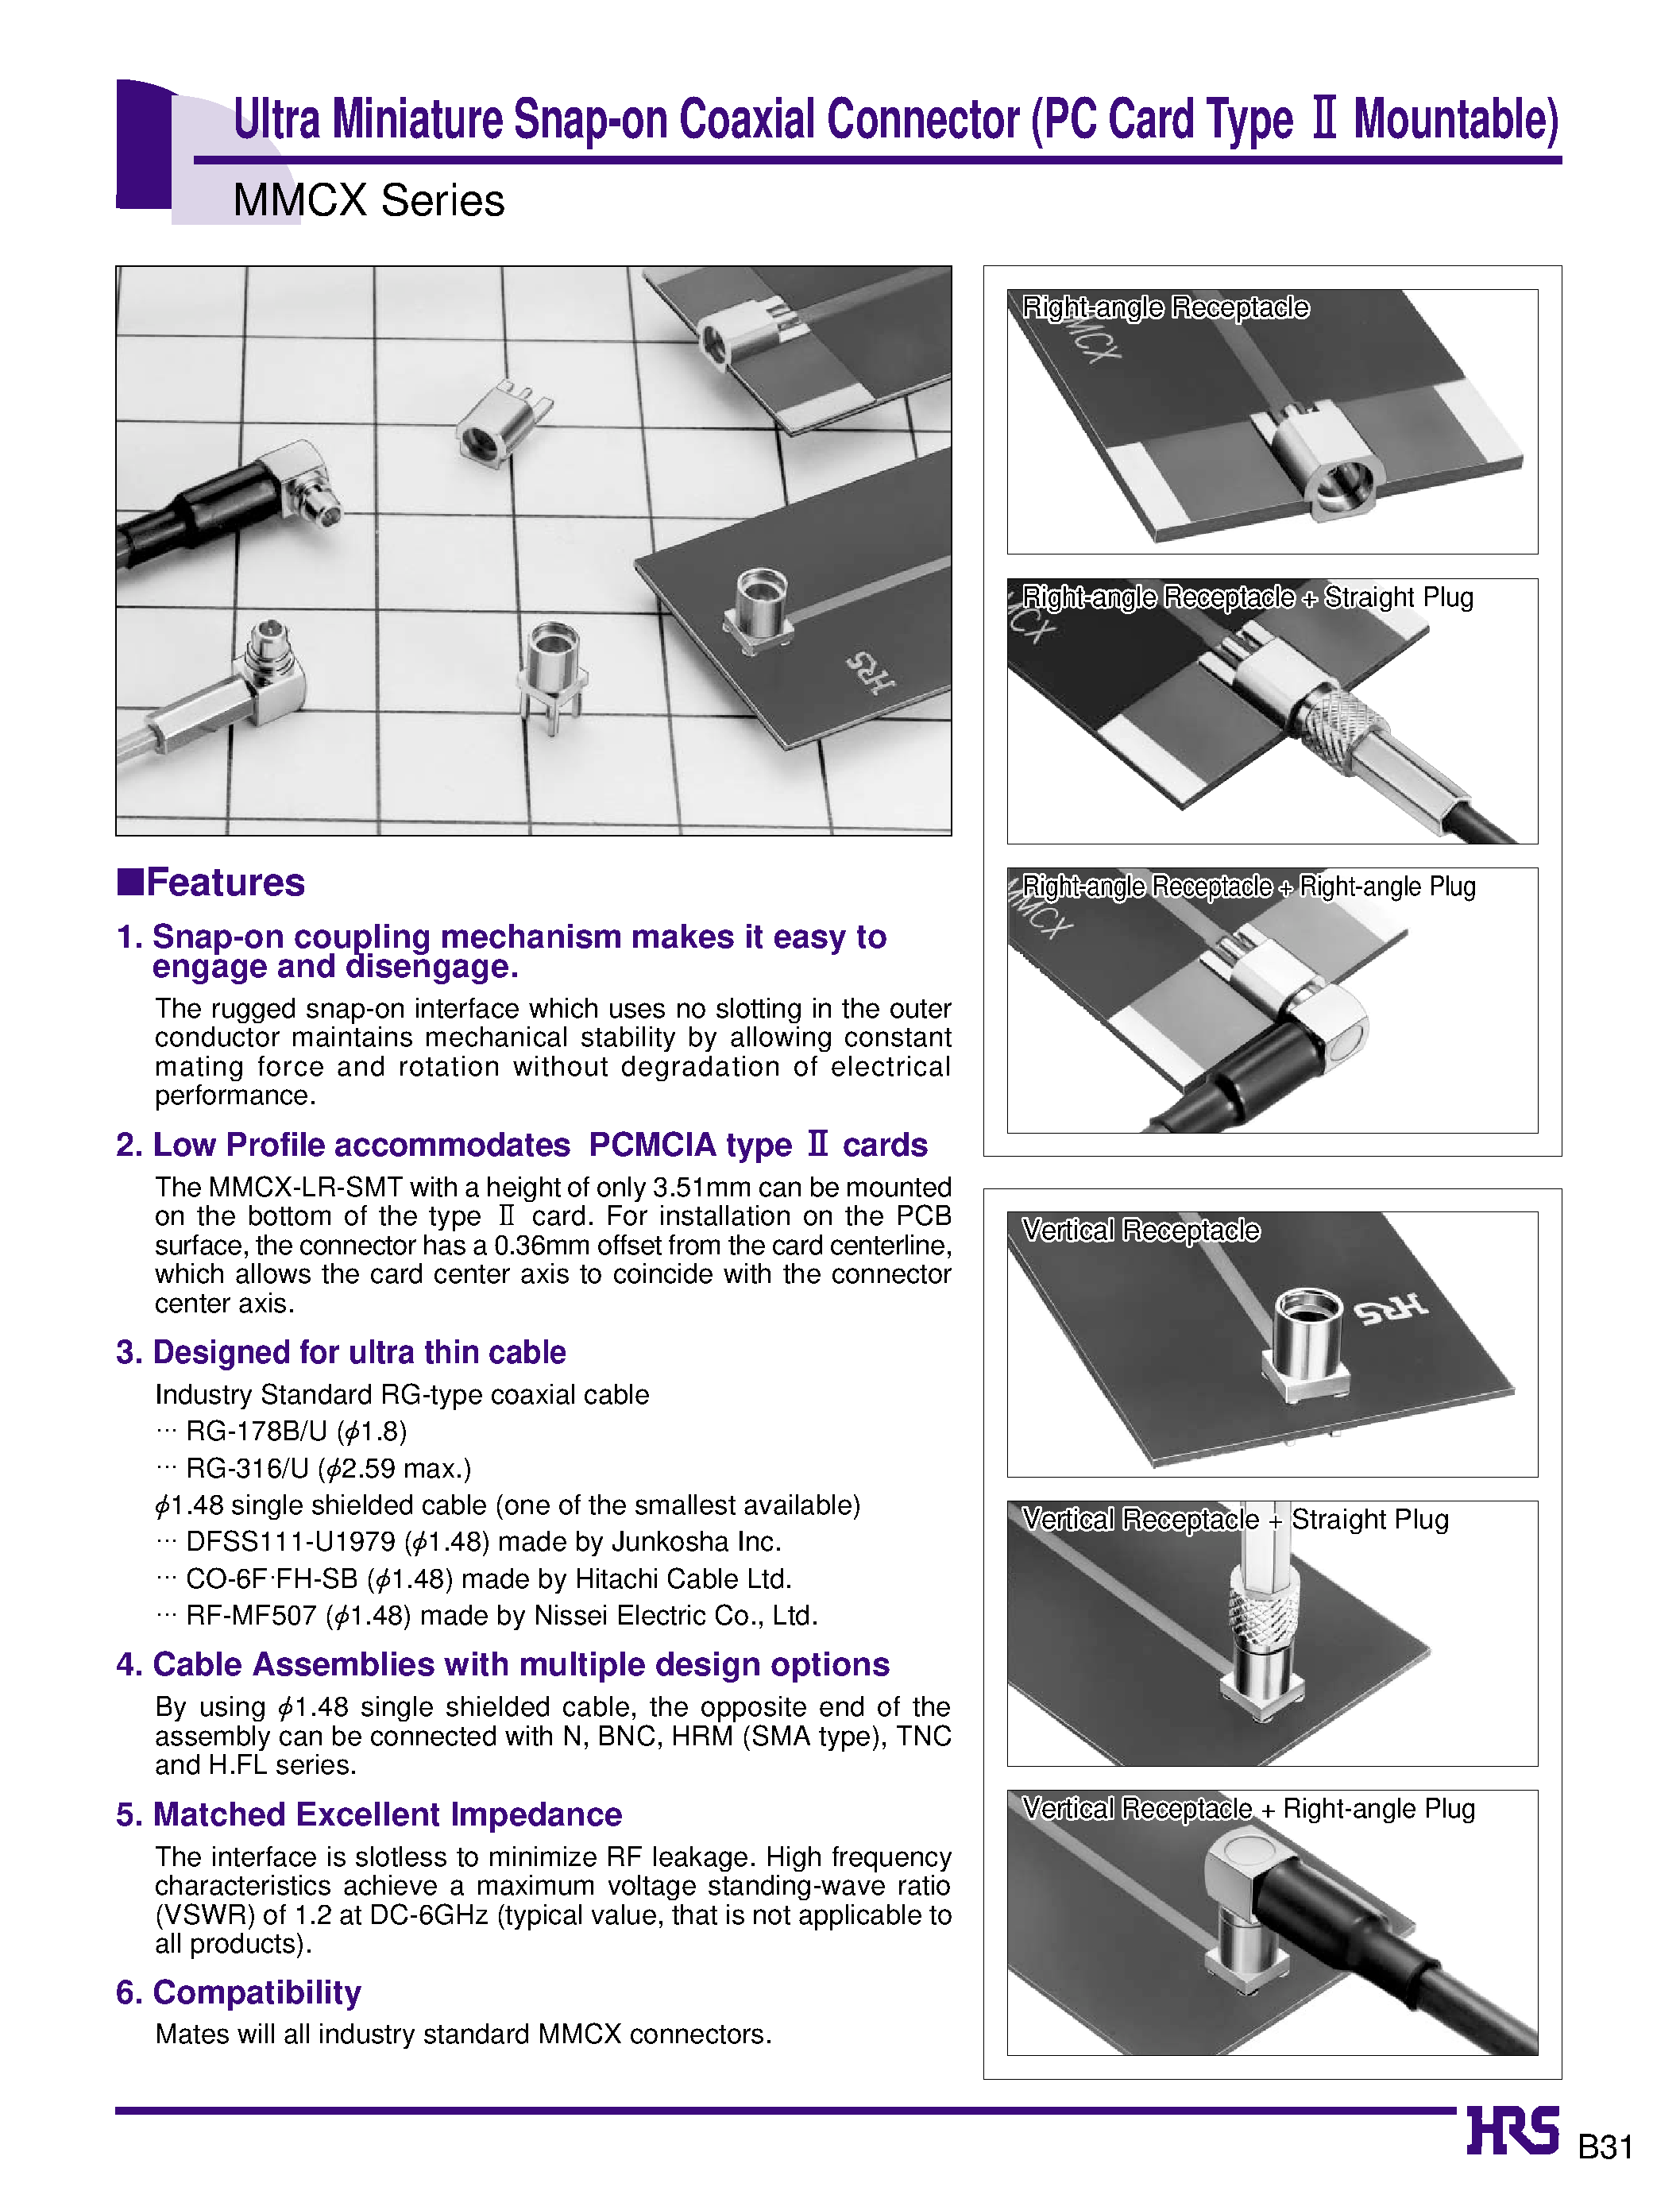 Datasheet MMCX-LR-316/U - Ultra Miniature Snap-on Coaxial Connector (PC Card Type 2 Mountable) page 1